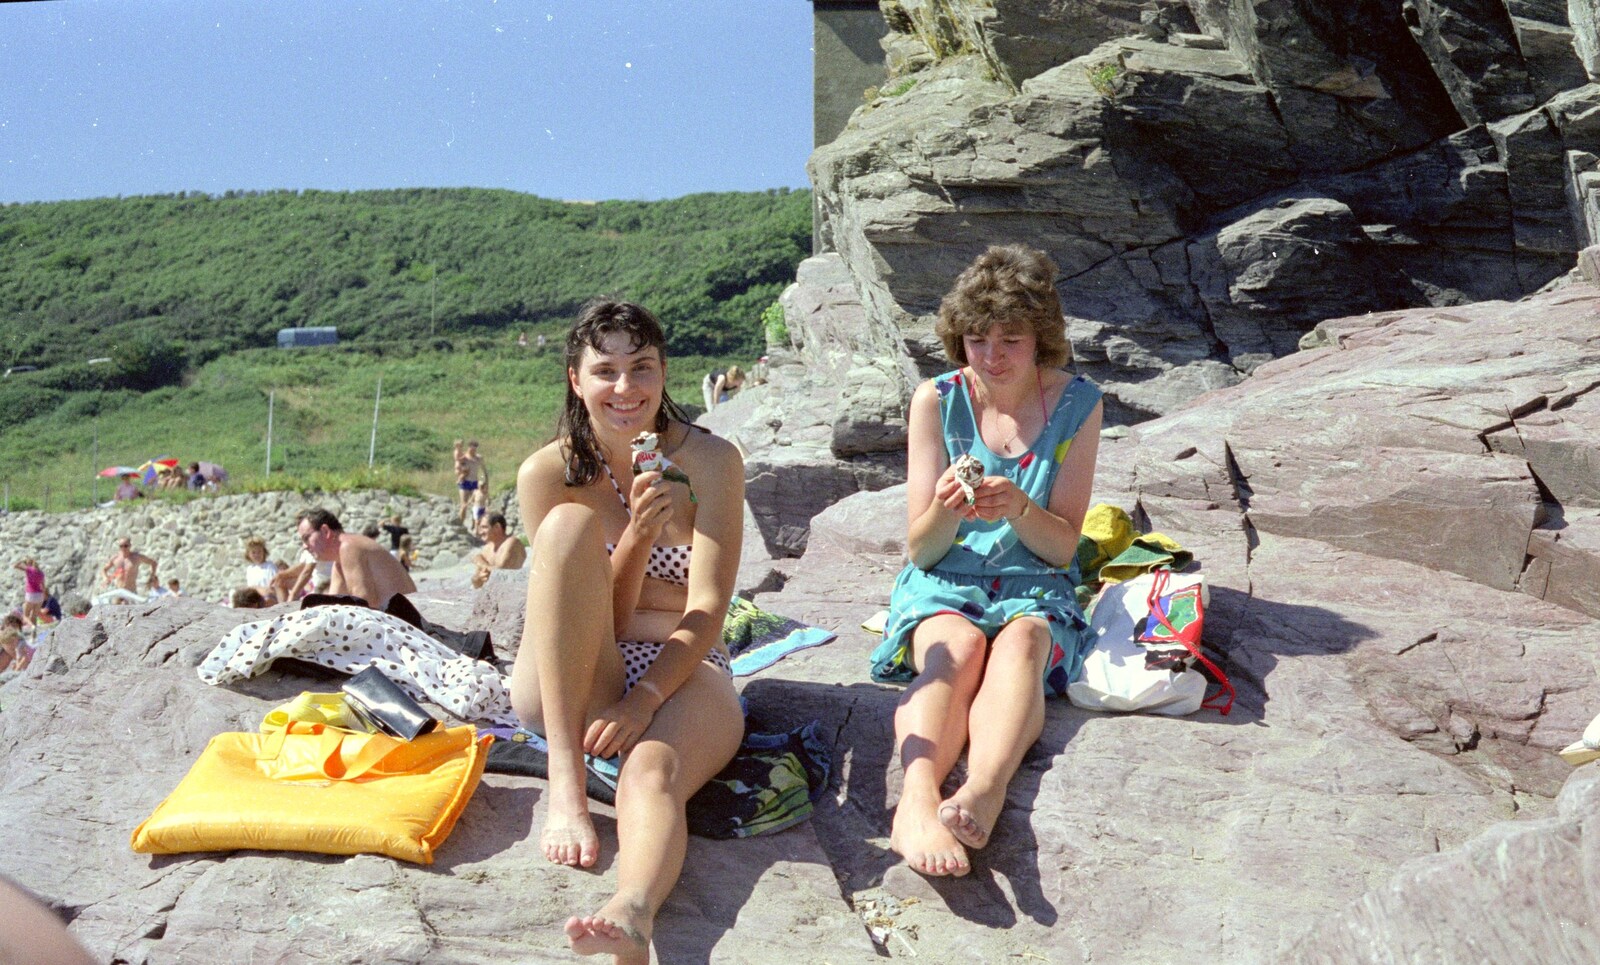 Uni: Country Clubs, On The Beach and Organs, Plymouth - 28th May 1989: Rebecca and her friend do some ice creams